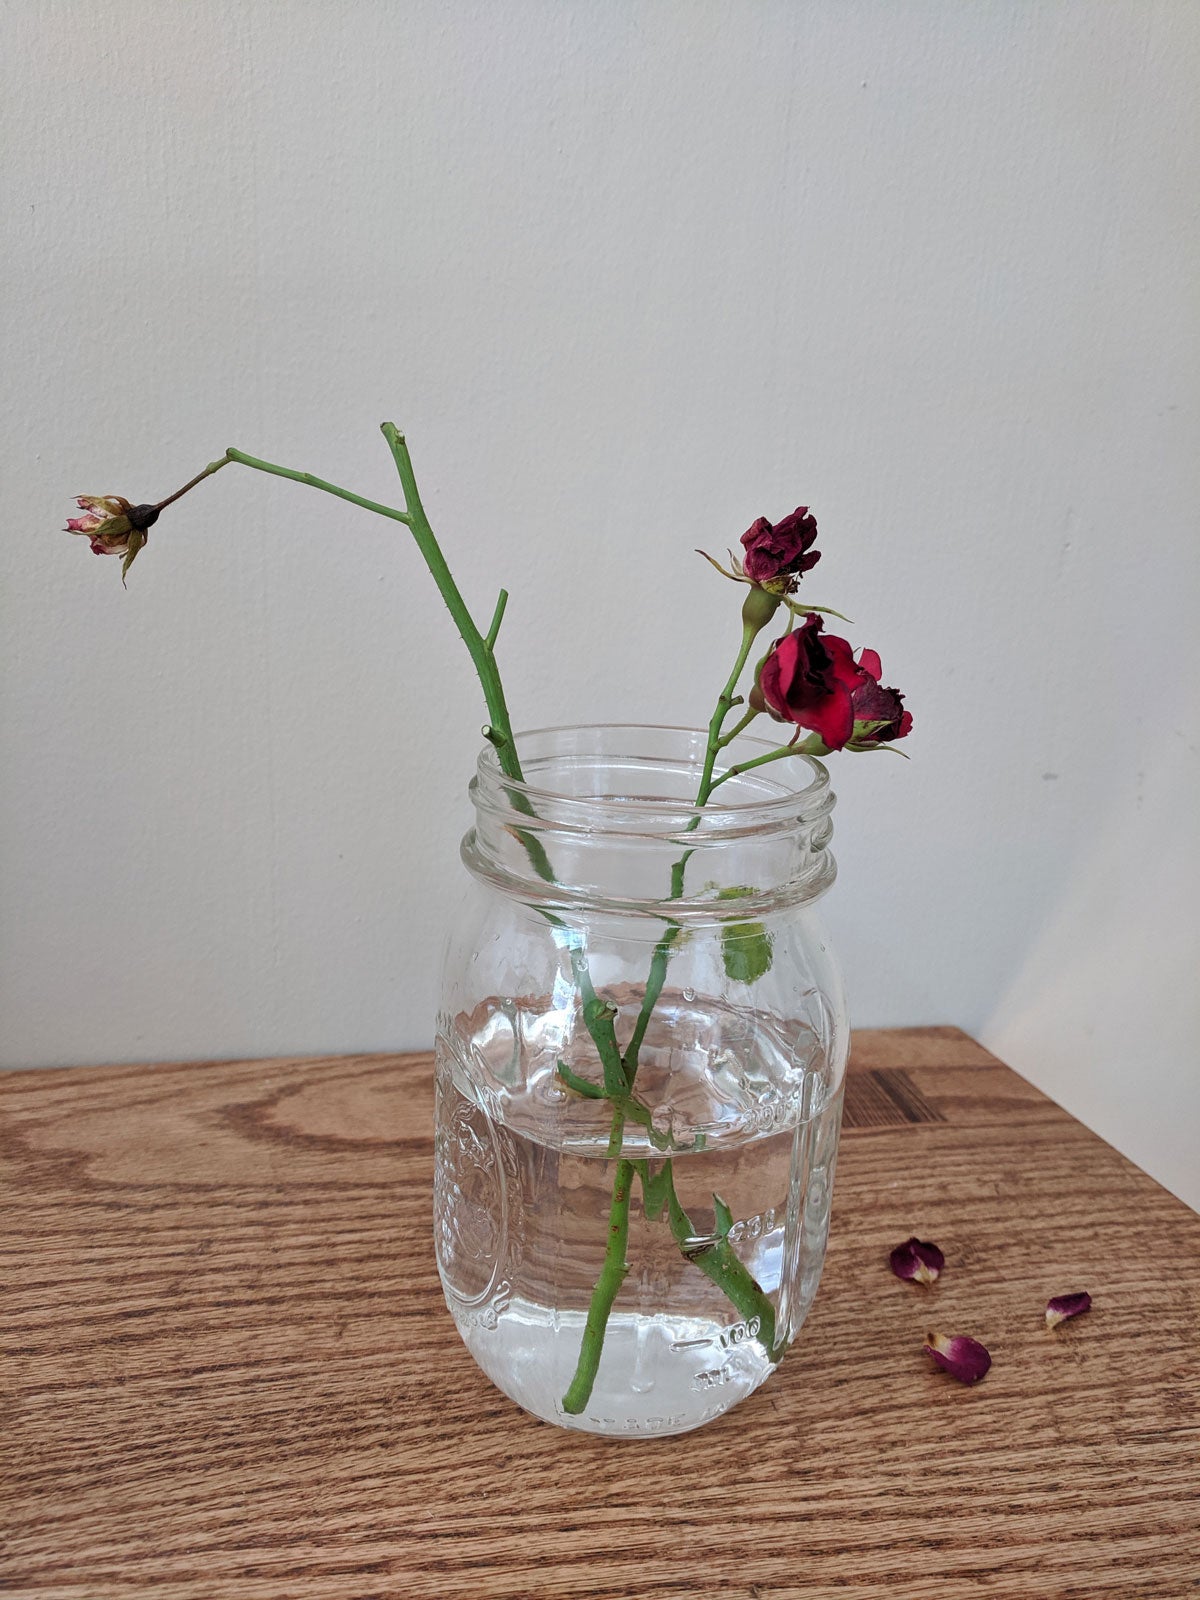 Growing Rose Cuttings In Water - Tips For Propagating ...